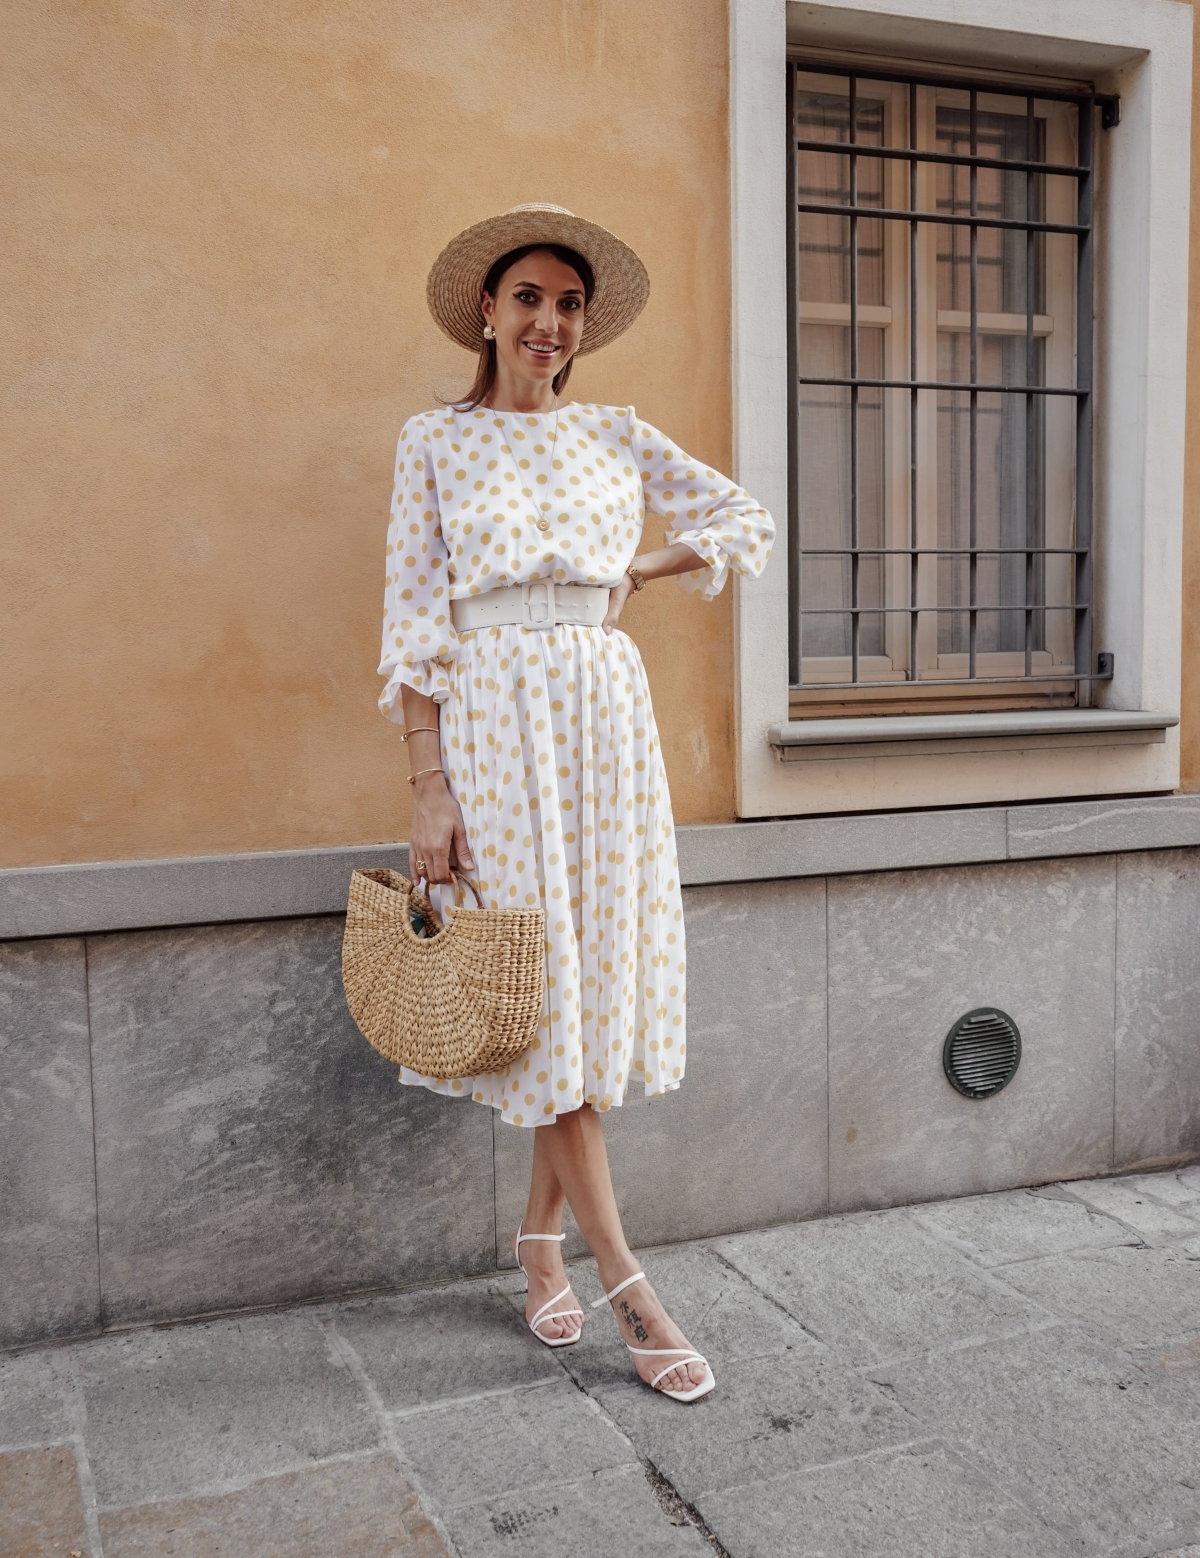 SUMMER DRESSES FROM POEMA | Welcome to my world